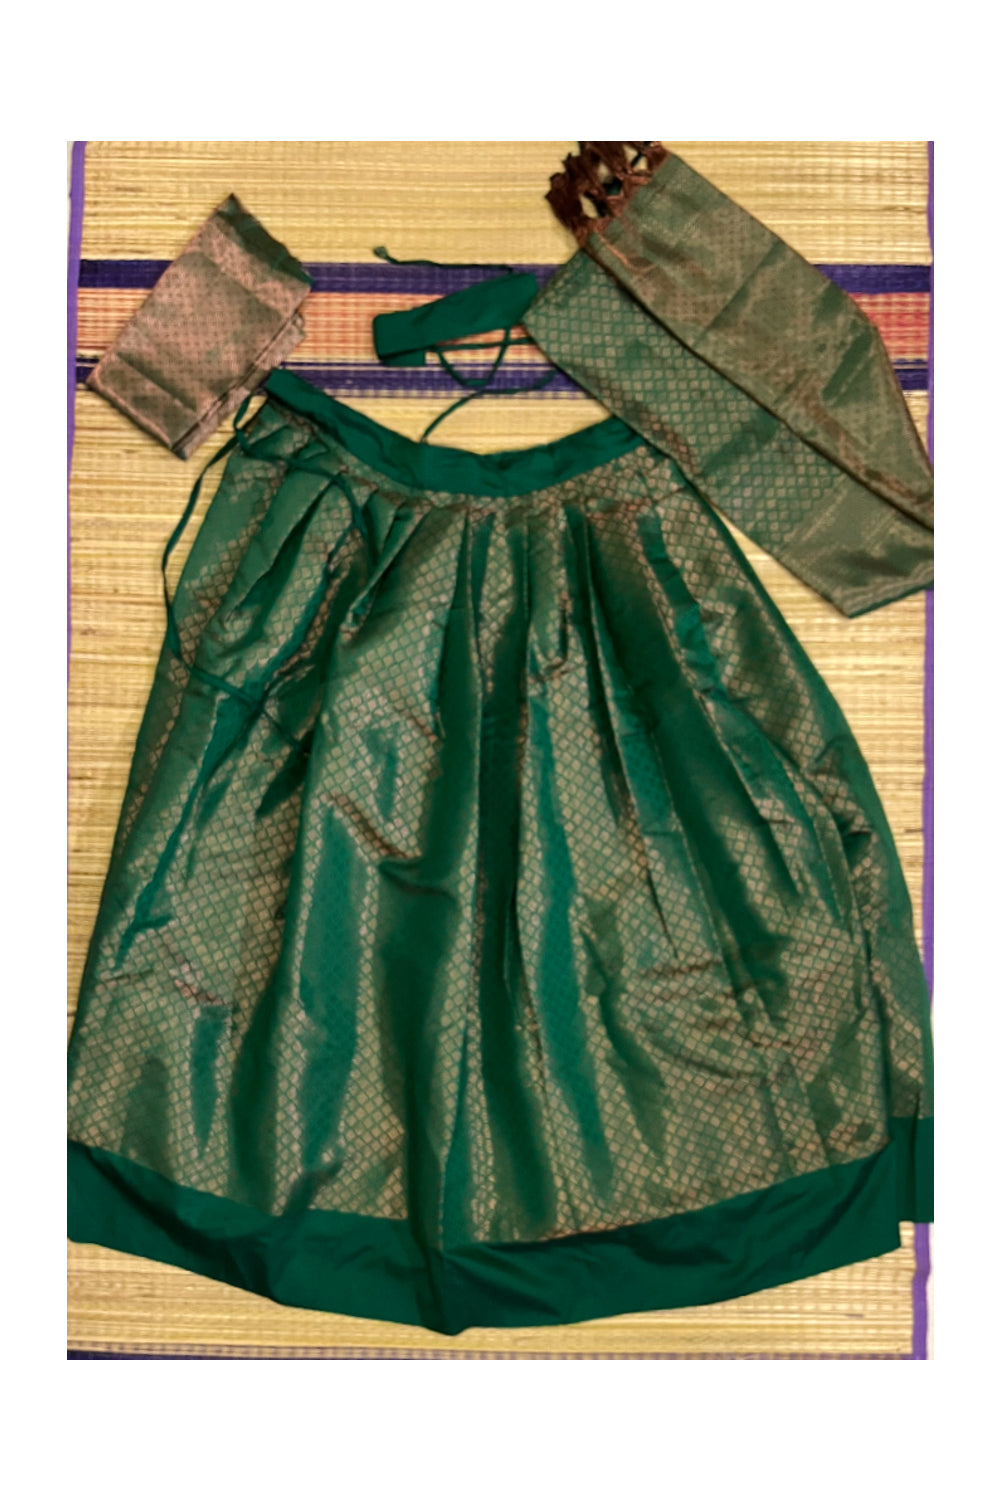 Southloom Semi Stitched Semi Silk Green Dhavani Set include Neriyathu and Blouse Piece